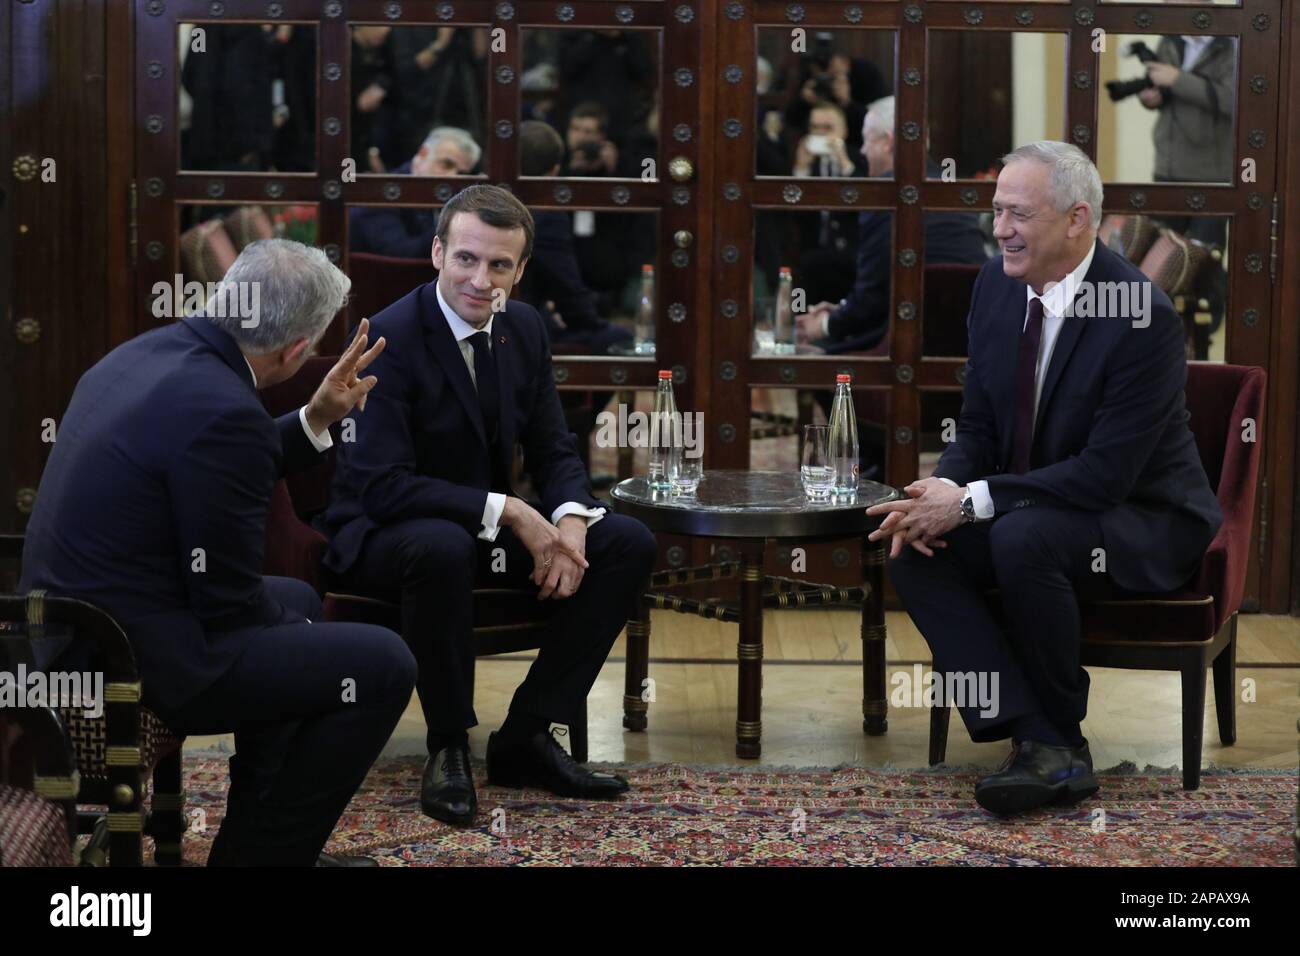 Jerusalem, Israel. 22nd Jan, 2020. French President Emmanuel Macron meets with Blue and White Party leaders Benny Gantz and Yair Lapid (L) ahead of the Fifth World Holocaust Forum at the King David hotel in Jerusalem, Israel, on Wednesday, January 22, 2020. Macron is on a two trip to Israel and the West Bank to discuss the Iran tensions and the Palestinian peace process. Pool Photo by Abil Sultan/UPI Credit: UPI/Alamy Live News Stock Photo